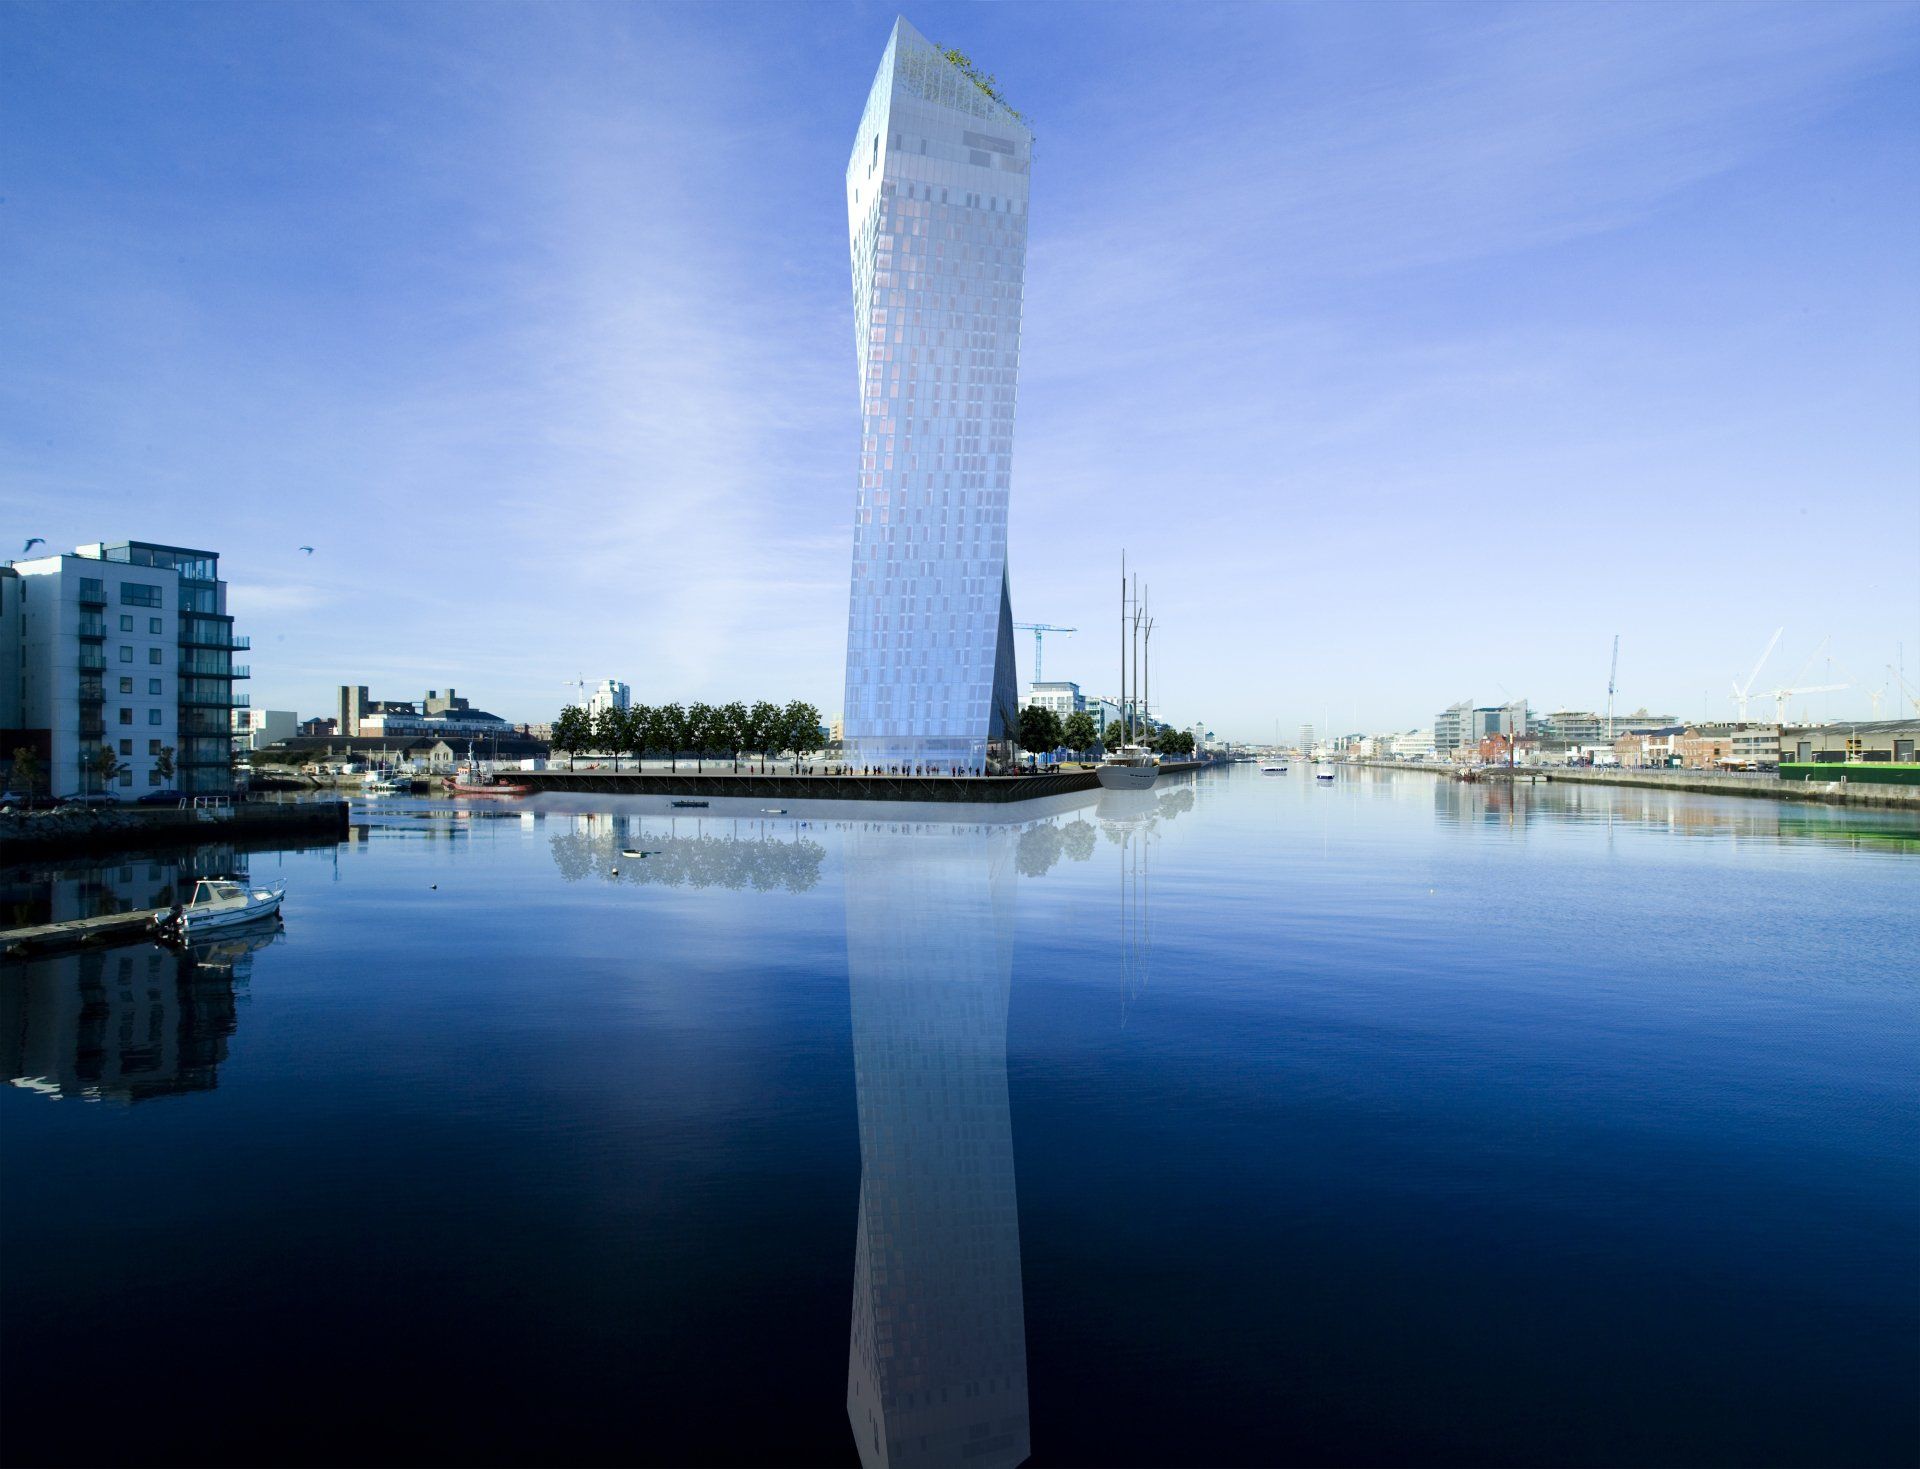 Exterior view from the other side of the river of the U2 Tower designed by Dublin Design Studio